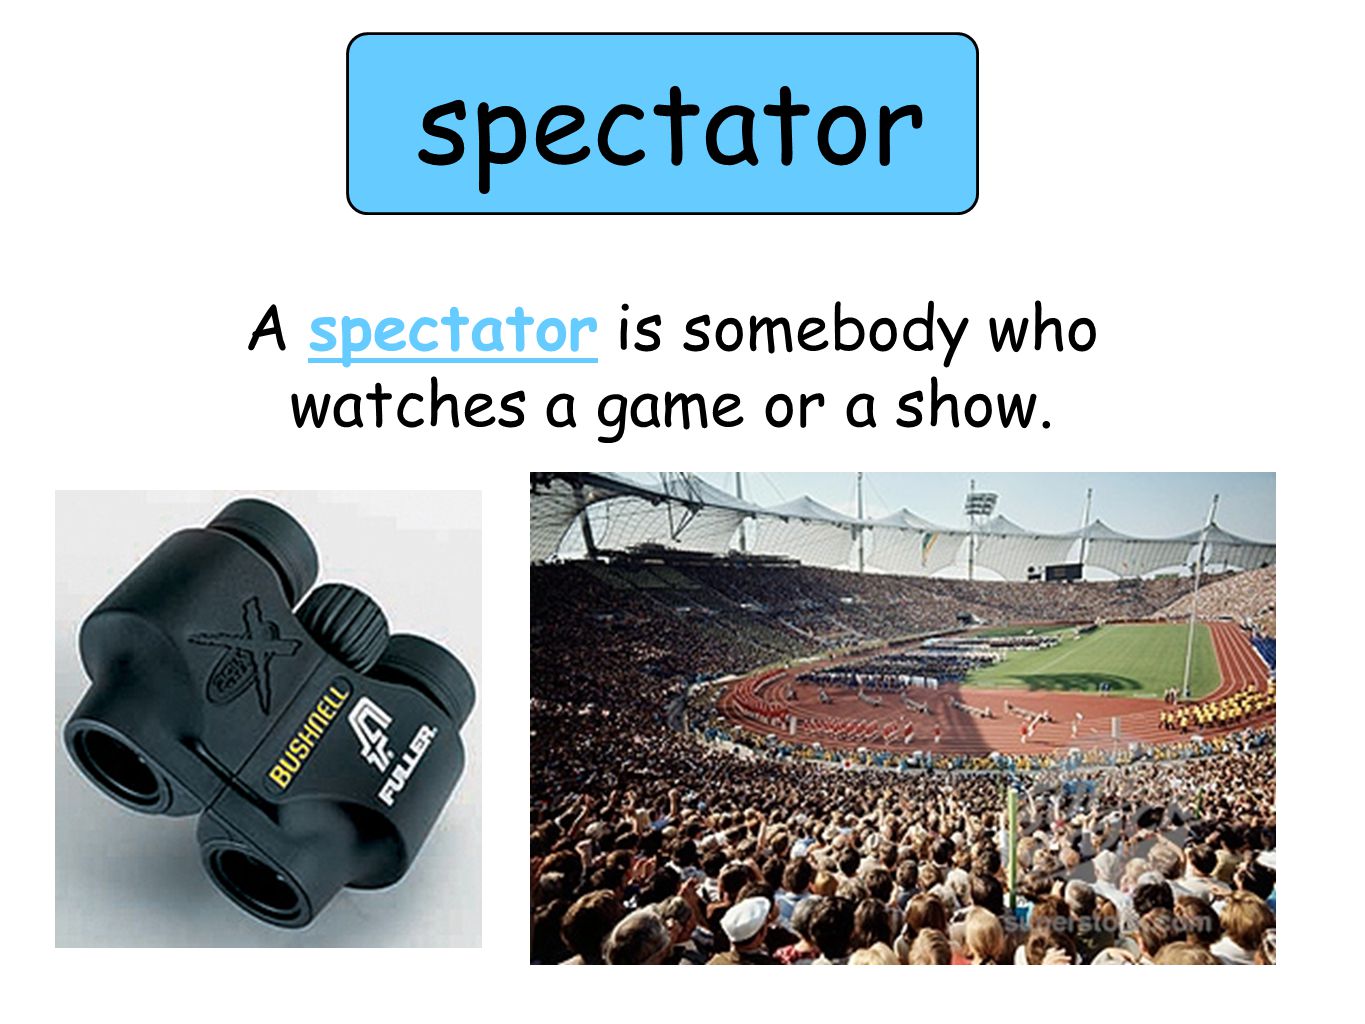 spectator A spectator is somebody who watches a game or a show.